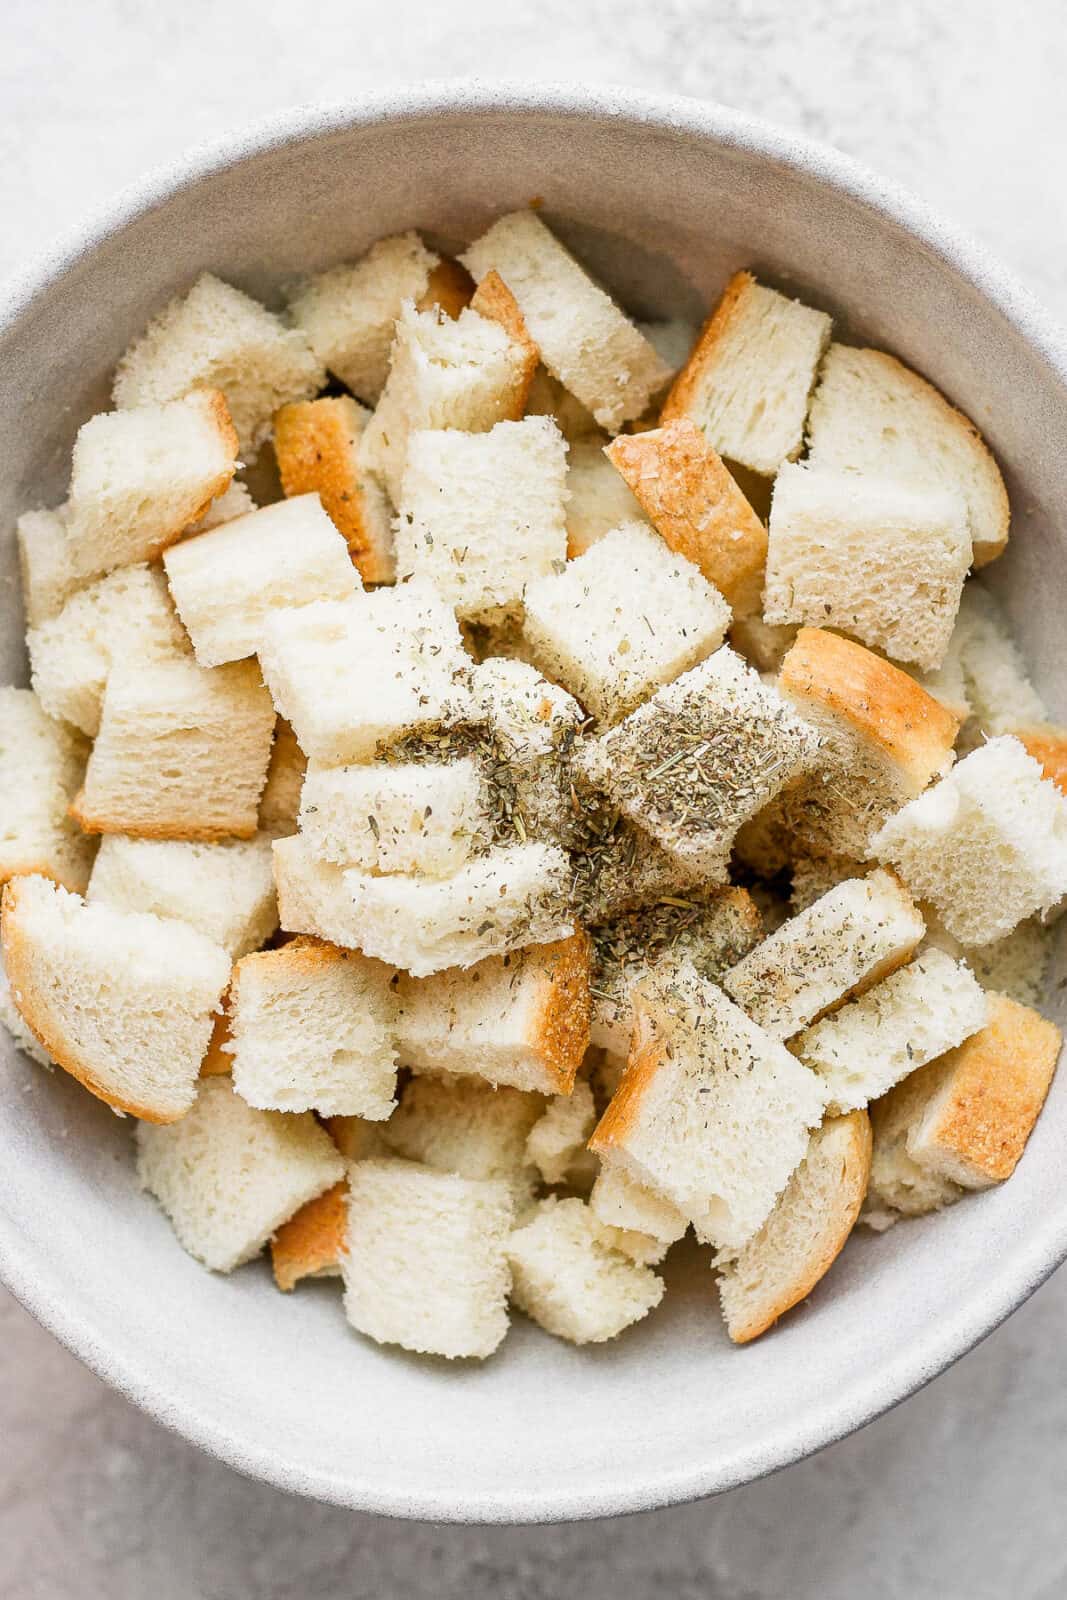 Cubed bread in a bowl with seasonings added on top.